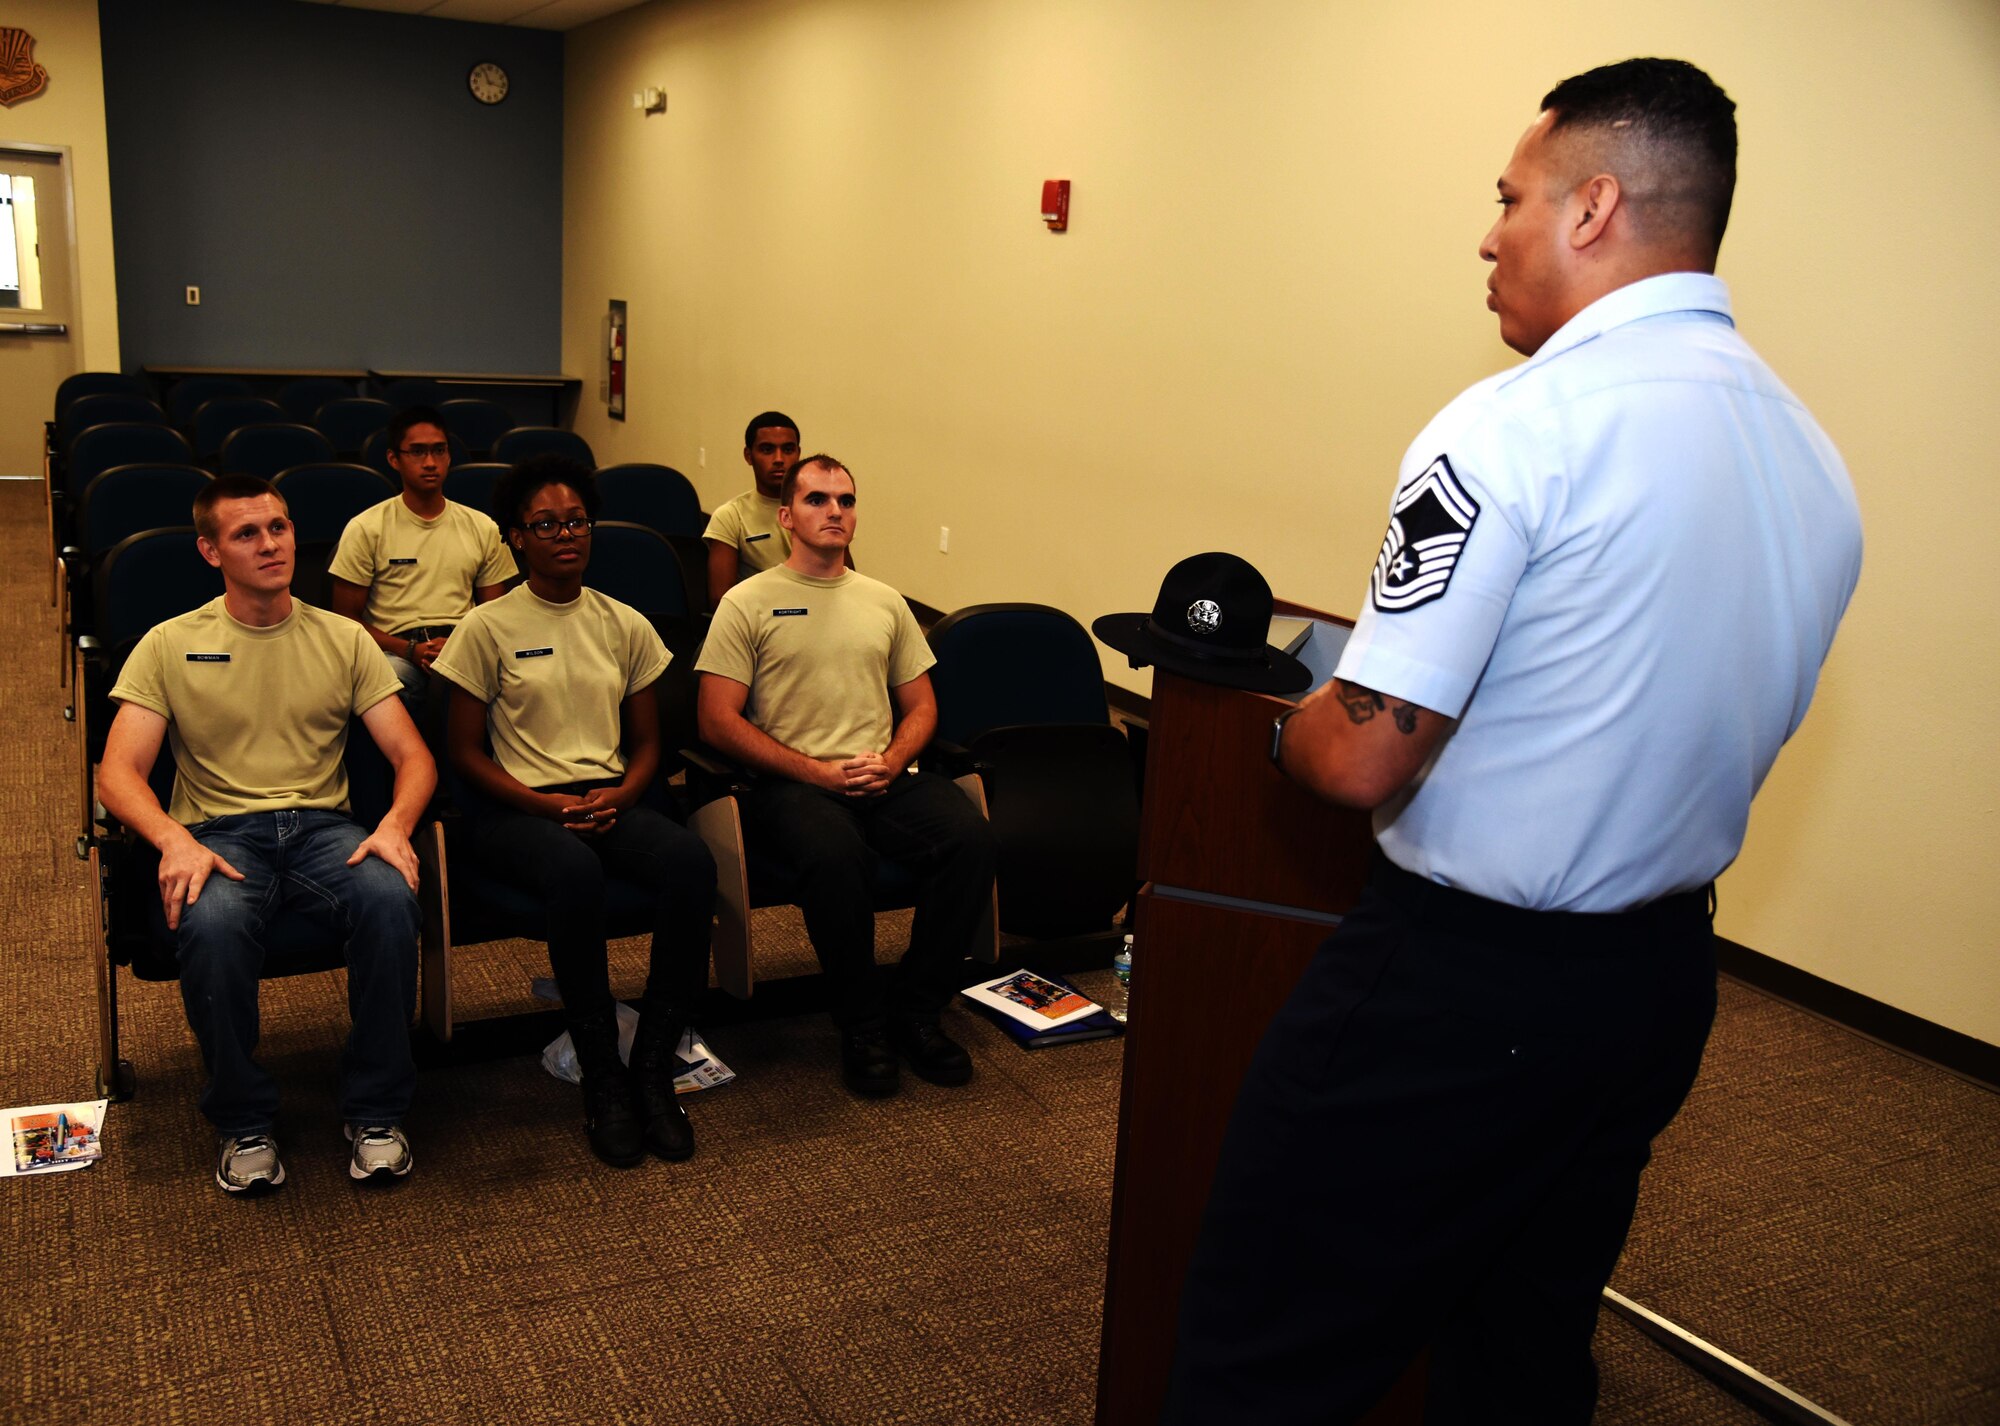 Senior Master Sgt. Ricardo Chavez, Military Training Instructor/433rd Training Squadron superintendent, talks with future Airmen assigned to the 927th Air Refueling Wing developmental training flight during the August Unit Training Assembly at MacDill Air Force Base. MacDill welcomed two MTIs to educate reservists about opportunities to join the MTIs Corps. While the were here, they wanted to meet with the DTF to ensure the future trainees were prepared as they left for Basic Military Training. (U.S. Air Force Photo by Staff Sgt. Adam C. Borgman)